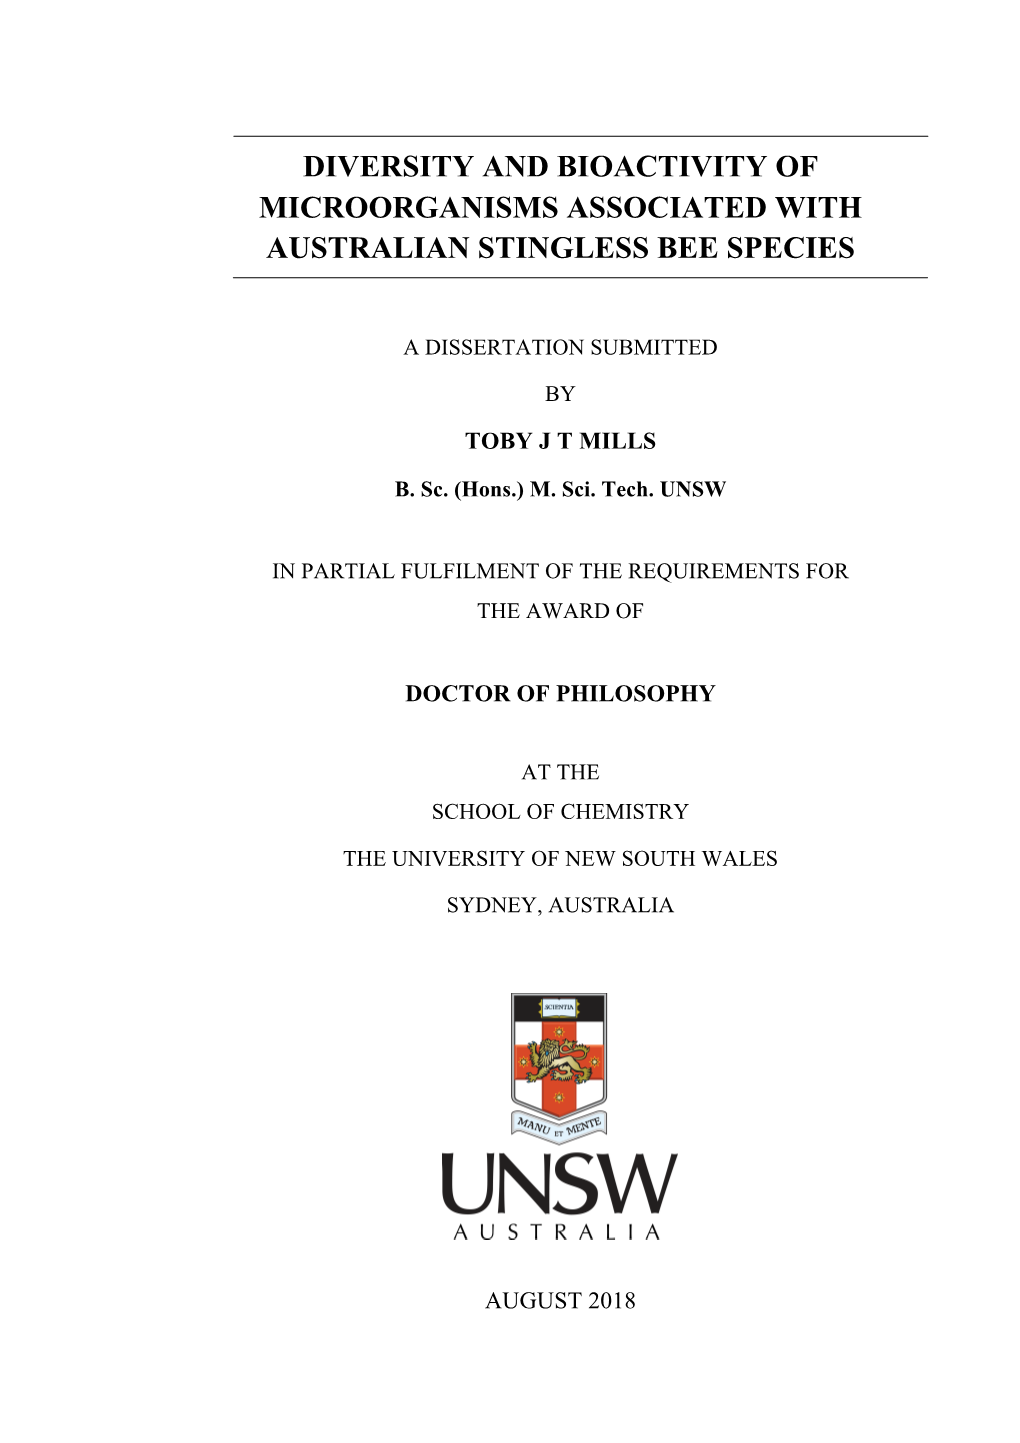 Diversity and Bioactivity of Microorganisms Associated with Australian Stingless Bee Species